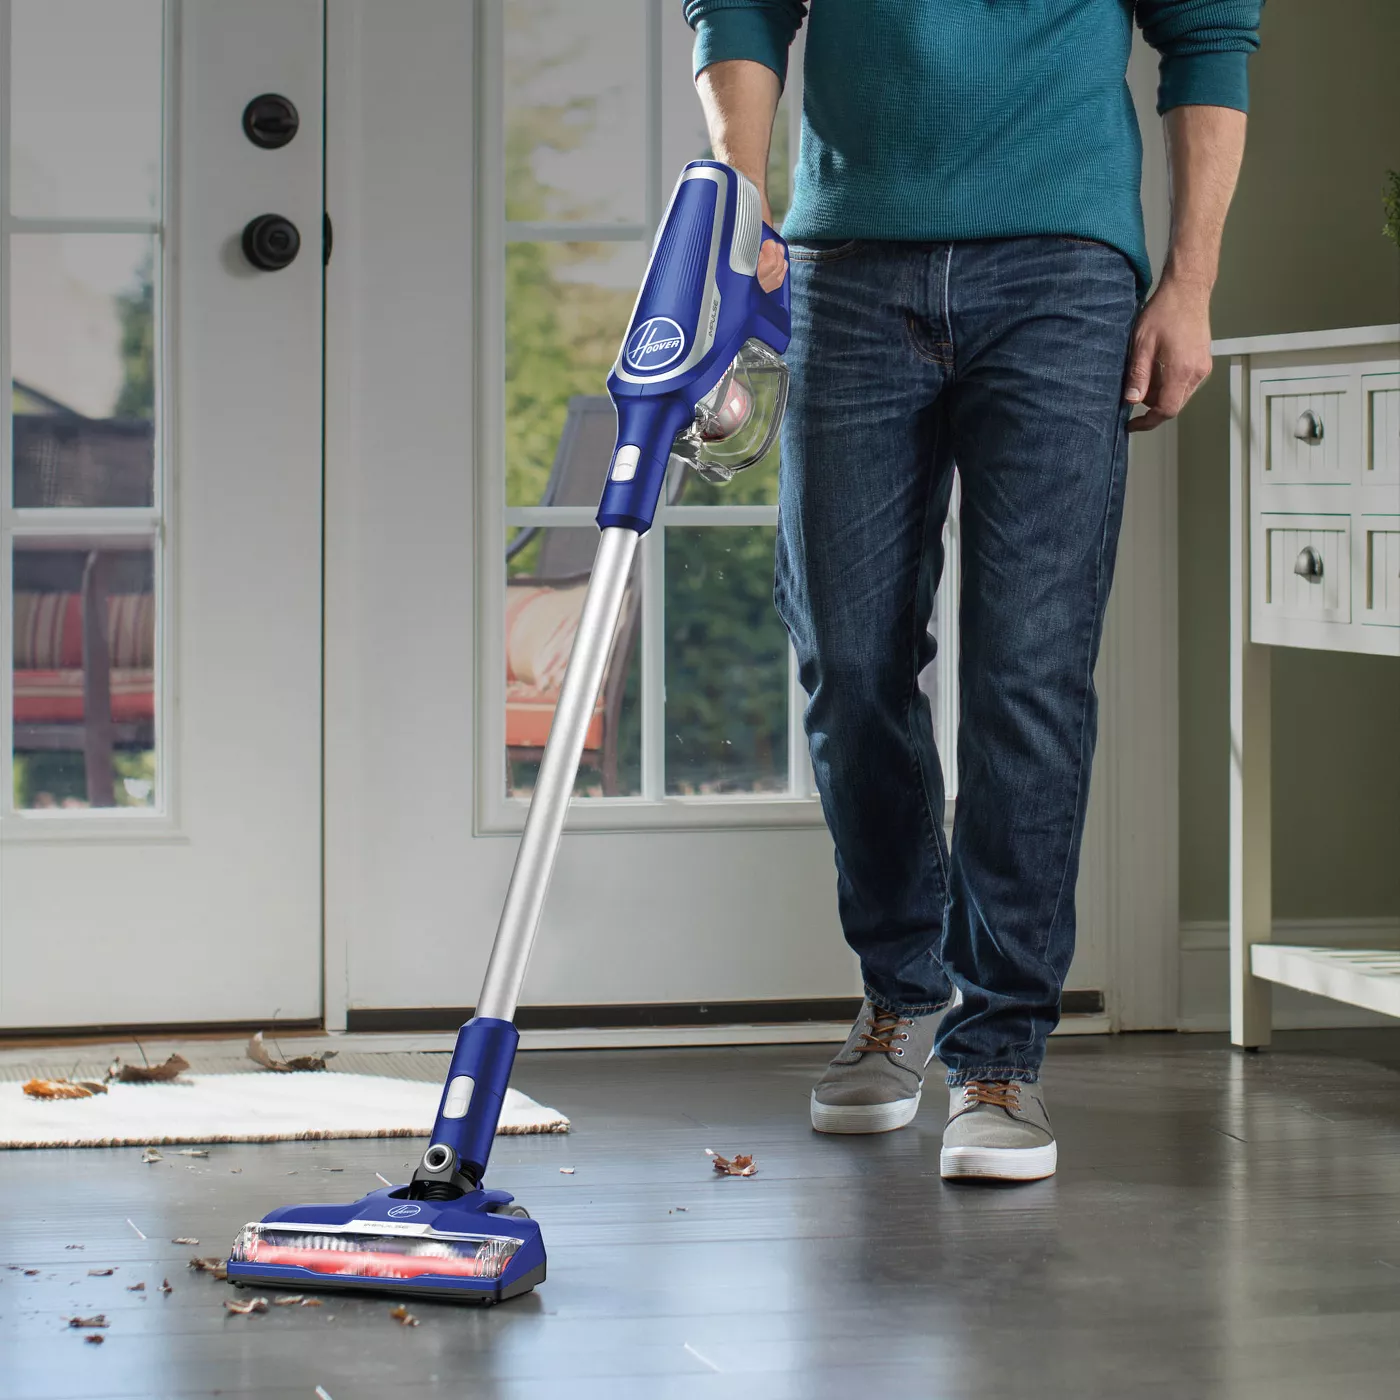 Hoover Impulse Cordless and Lightweight Stick Vacuum Cleaner with Remove Hand Held Vac - image 7 of 8